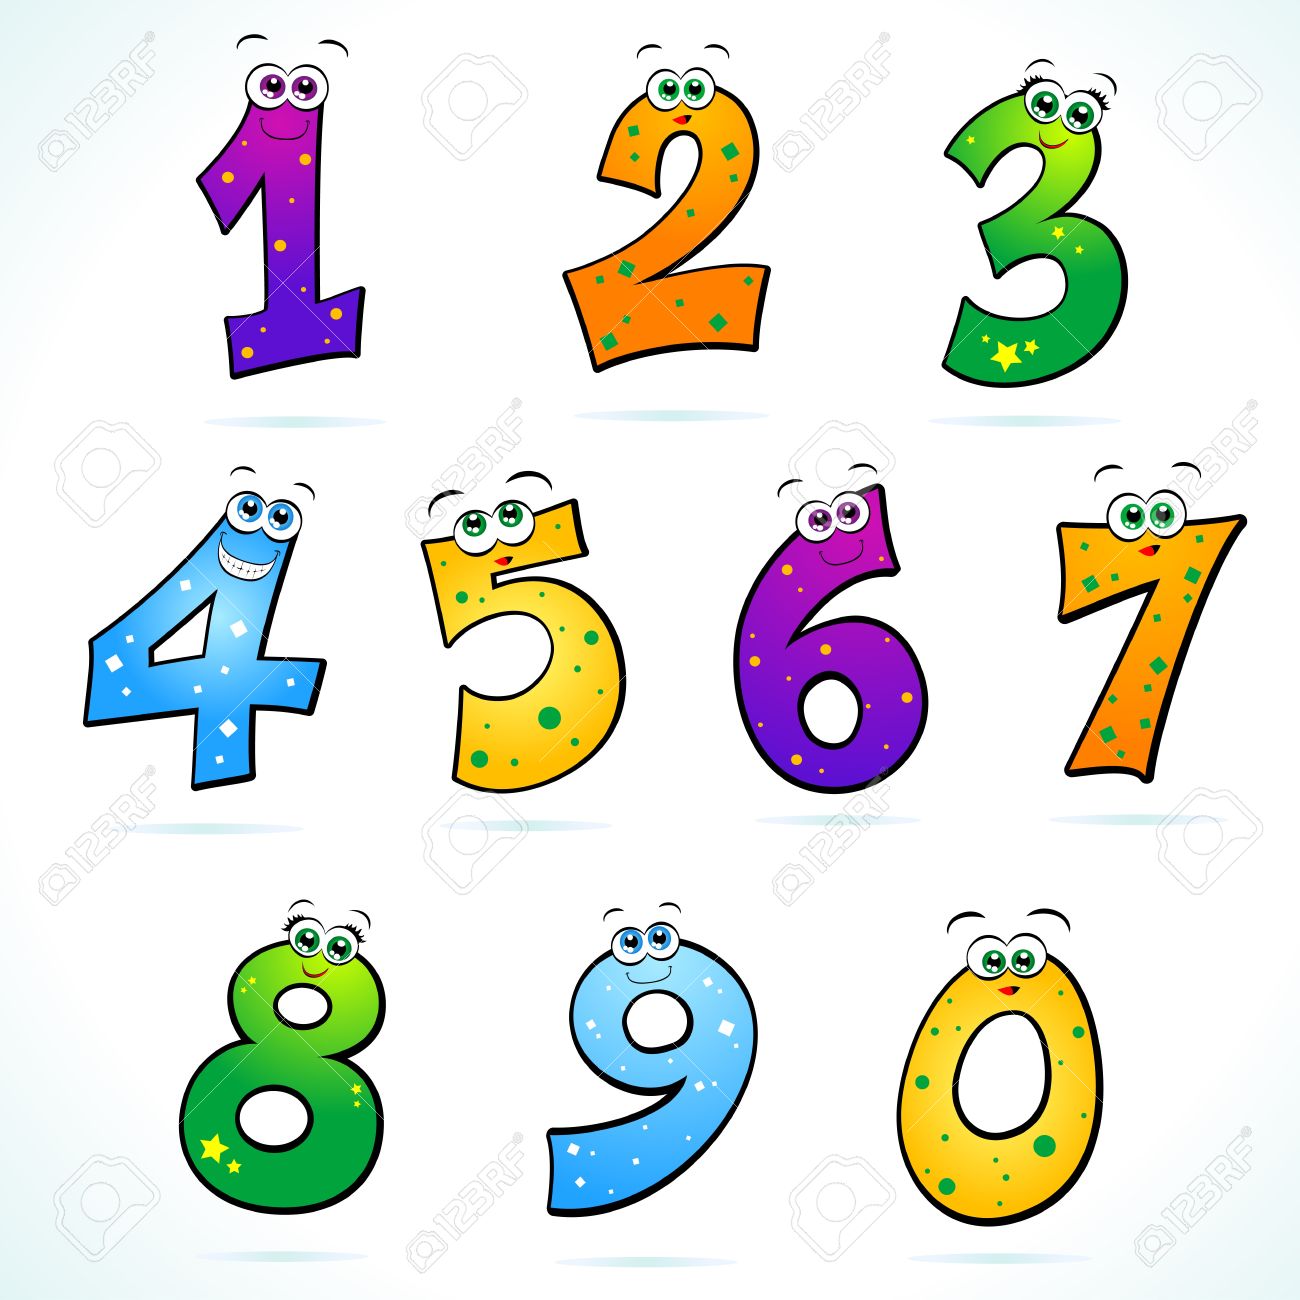 Numbers Clipart Numbers Clipa